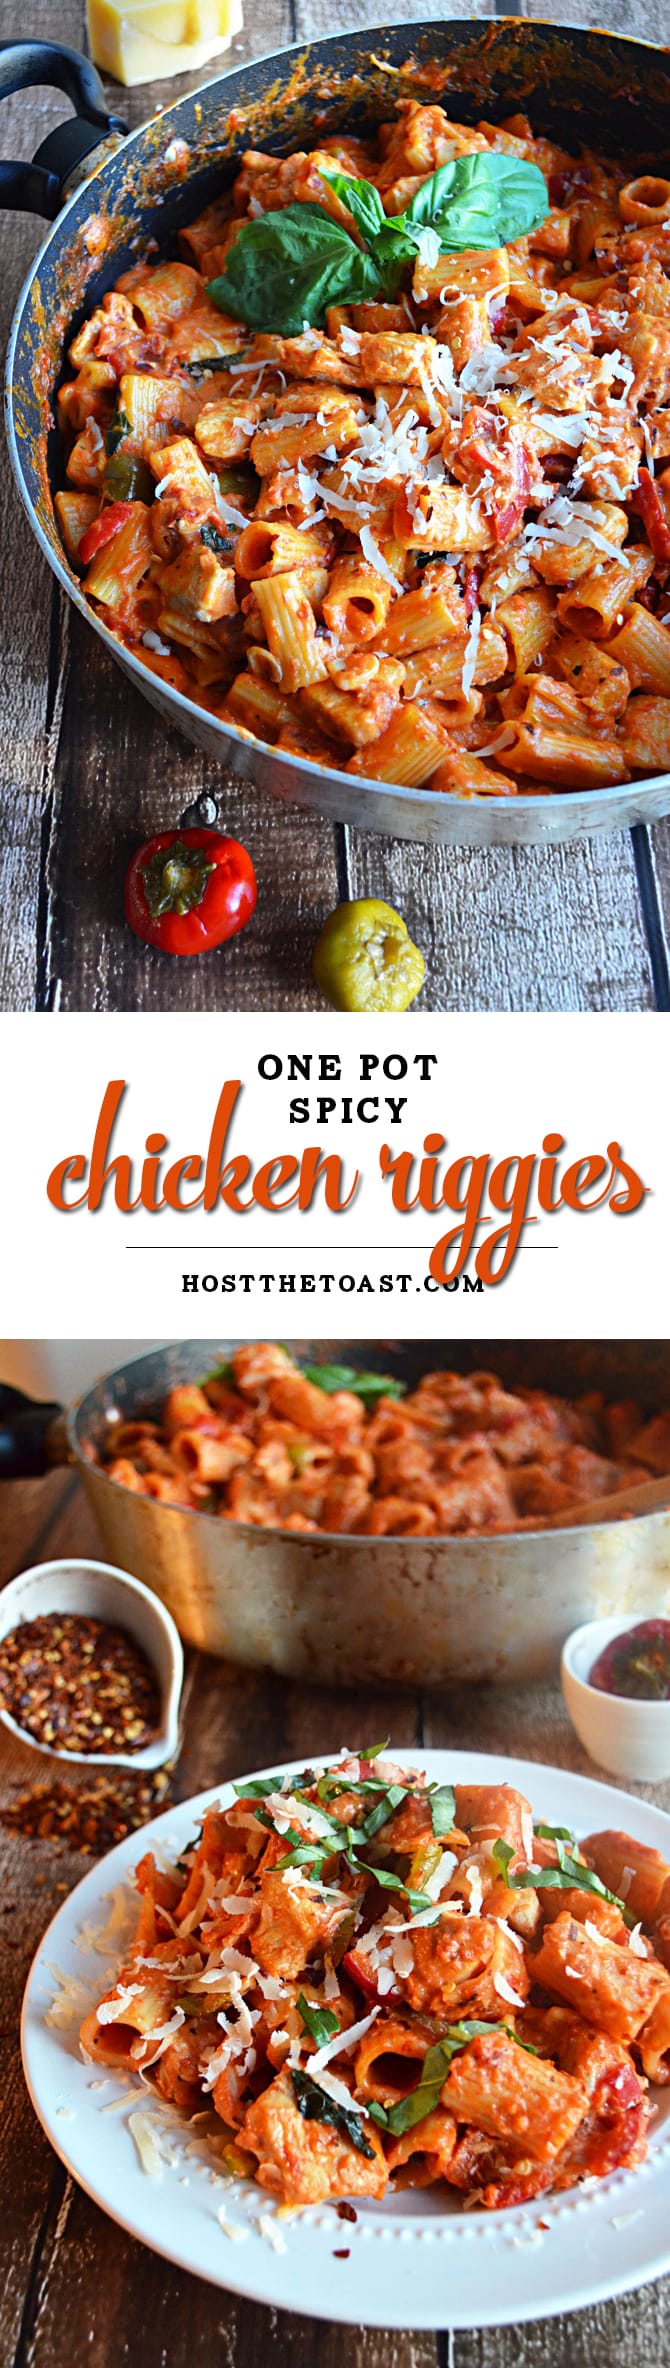 One Pot Spicy Chicken Riggies. That's right, this delicious meal is made in just one pot, from cooking the chicken to making the sauce, to boiling the pasta! And you won't believe how insanely delicious it turns out. One of my favorite recipes of all time.